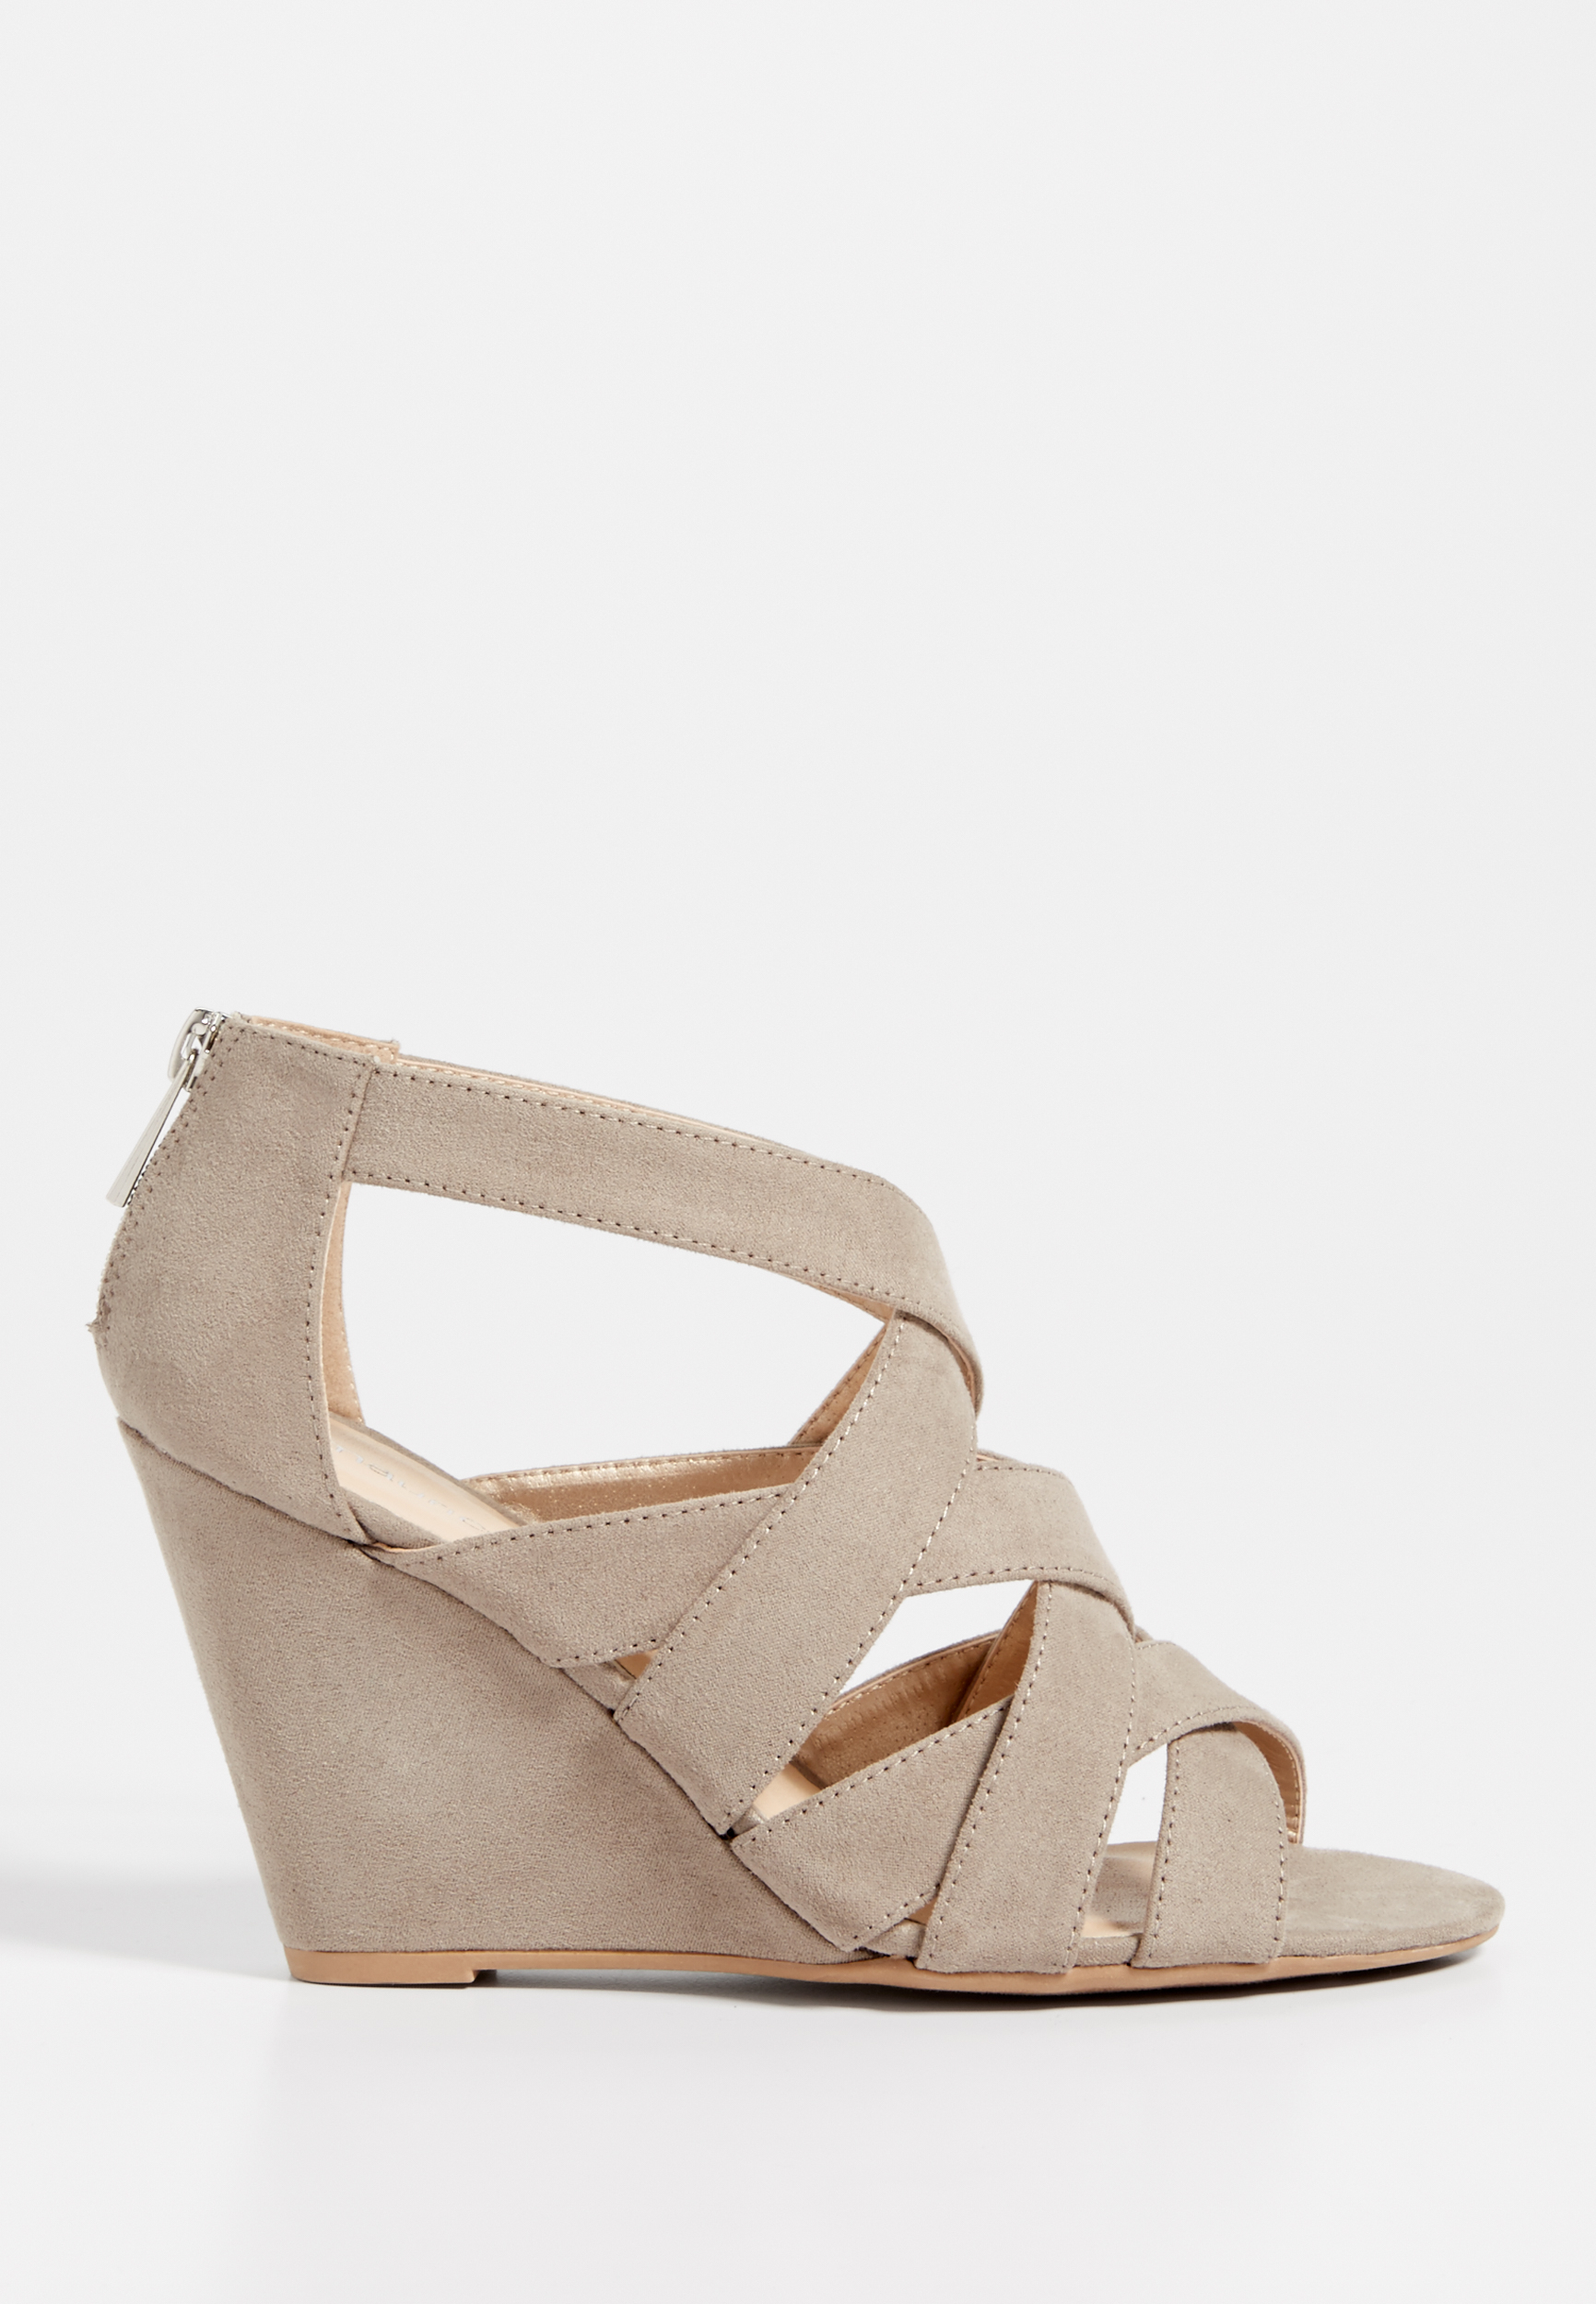 Janice strappy wedge | maurices